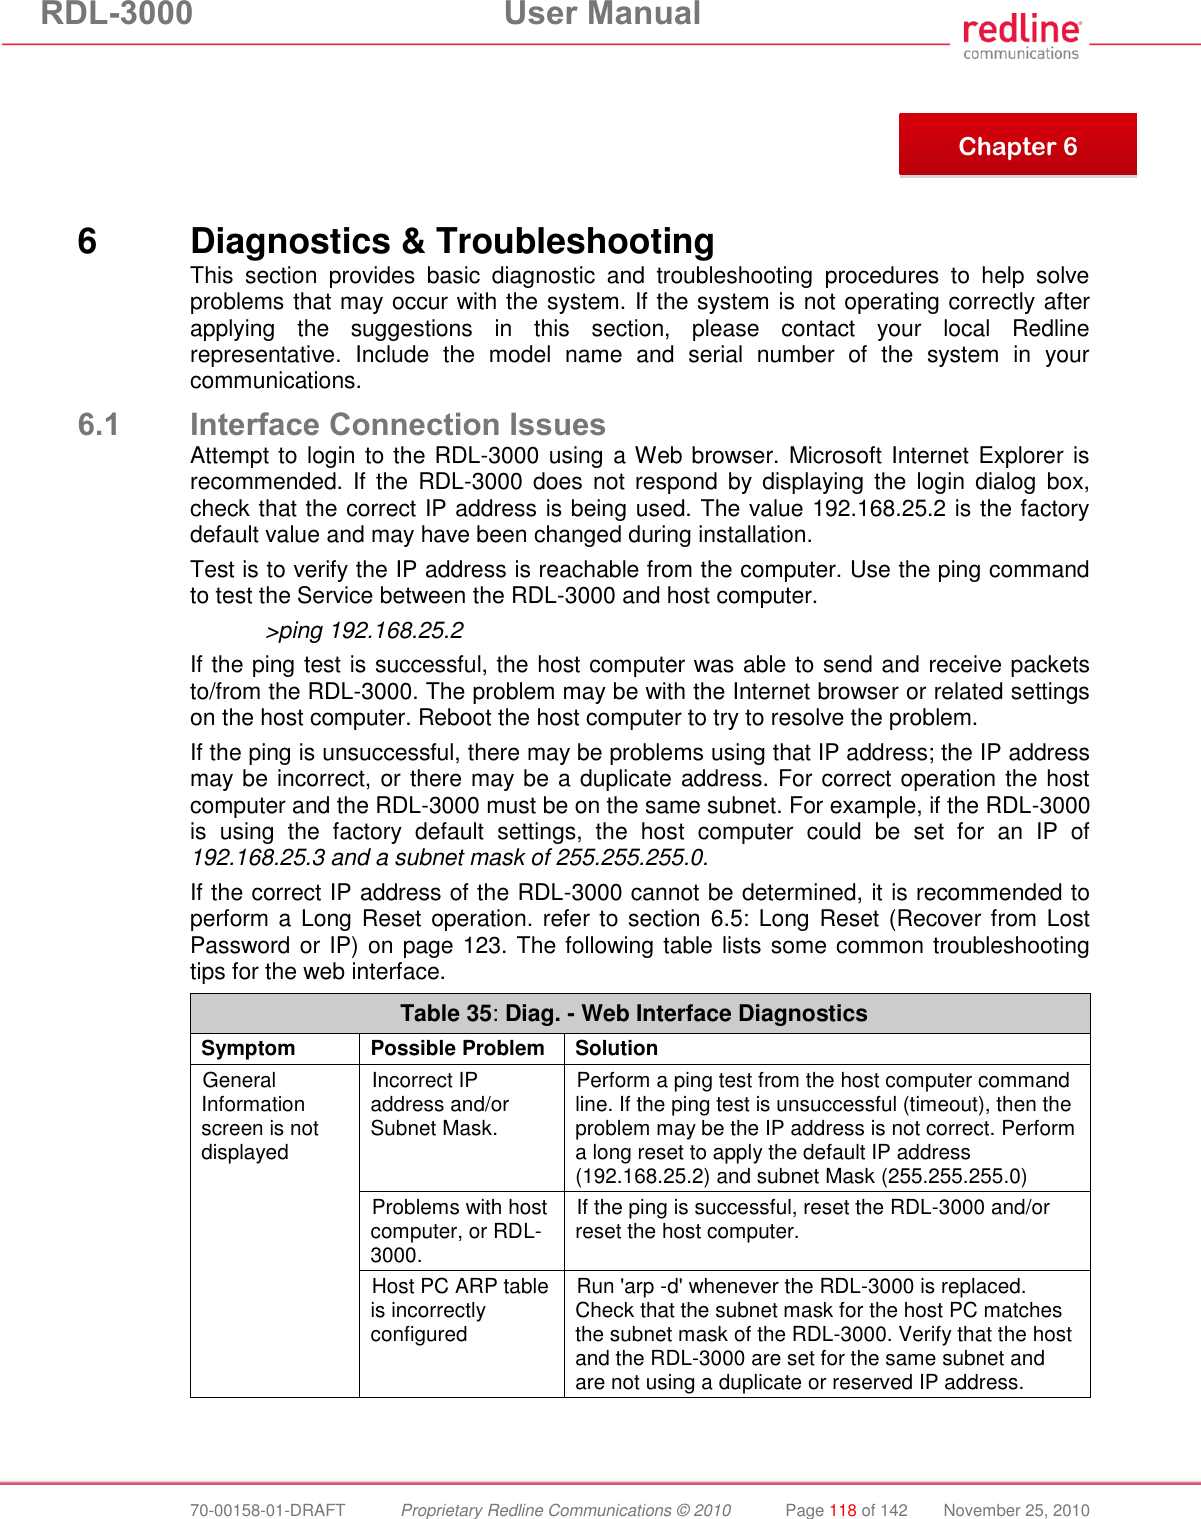 RDL-3000  User Manual  70-00158-01-DRAFT  Proprietary Redline Communications © 2010  Page 118 of 142  November 25, 2010       6  Diagnostics &amp; Troubleshooting This  section  provides  basic  diagnostic  and  troubleshooting  procedures  to  help  solve problems that may occur with the system. If the system is not operating correctly after applying  the  suggestions  in  this  section,  please  contact  your  local  Redline representative.  Include  the  model  name  and  serial  number  of  the  system  in  your communications. 6.1 Interface Connection Issues Attempt to login to the RDL-3000 using  a Web browser. Microsoft Internet Explorer is recommended.  If  the  RDL-3000 does  not  respond  by  displaying  the  login  dialog  box, check that the correct IP address is being used. The value 192.168.25.2 is the factory default value and may have been changed during installation. Test is to verify the IP address is reachable from the computer. Use the ping command to test the Service between the RDL-3000 and host computer. &gt;ping 192.168.25.2 If the ping test is successful, the host computer was able to send and receive packets to/from the RDL-3000. The problem may be with the Internet browser or related settings on the host computer. Reboot the host computer to try to resolve the problem. If the ping is unsuccessful, there may be problems using that IP address; the IP address may be incorrect, or there may be a duplicate address. For correct operation the host computer and the RDL-3000 must be on the same subnet. For example, if the RDL-3000 is  using  the  factory  default  settings,  the  host  computer  could  be  set  for  an  IP  of 192.168.25.3 and a subnet mask of 255.255.255.0. If the correct IP address of the RDL-3000 cannot be determined, it is recommended to perform a  Long Reset operation. refer to section  6.5:  Long Reset (Recover from Lost Password or IP) on page 123. The following table lists some common troubleshooting tips for the web interface. Table 35: Diag. - Web Interface Diagnostics Symptom Possible Problem Solution General Information screen is not displayed Incorrect IP address and/or Subnet Mask. Perform a ping test from the host computer command line. If the ping test is unsuccessful (timeout), then the problem may be the IP address is not correct. Perform a long reset to apply the default IP address (192.168.25.2) and subnet Mask (255.255.255.0) Problems with host computer, or RDL-3000. If the ping is successful, reset the RDL-3000 and/or reset the host computer. Host PC ARP table is incorrectly configured Run &apos;arp -d&apos; whenever the RDL-3000 is replaced. Check that the subnet mask for the host PC matches the subnet mask of the RDL-3000. Verify that the host and the RDL-3000 are set for the same subnet and are not using a duplicate or reserved IP address.   Chapter 6 